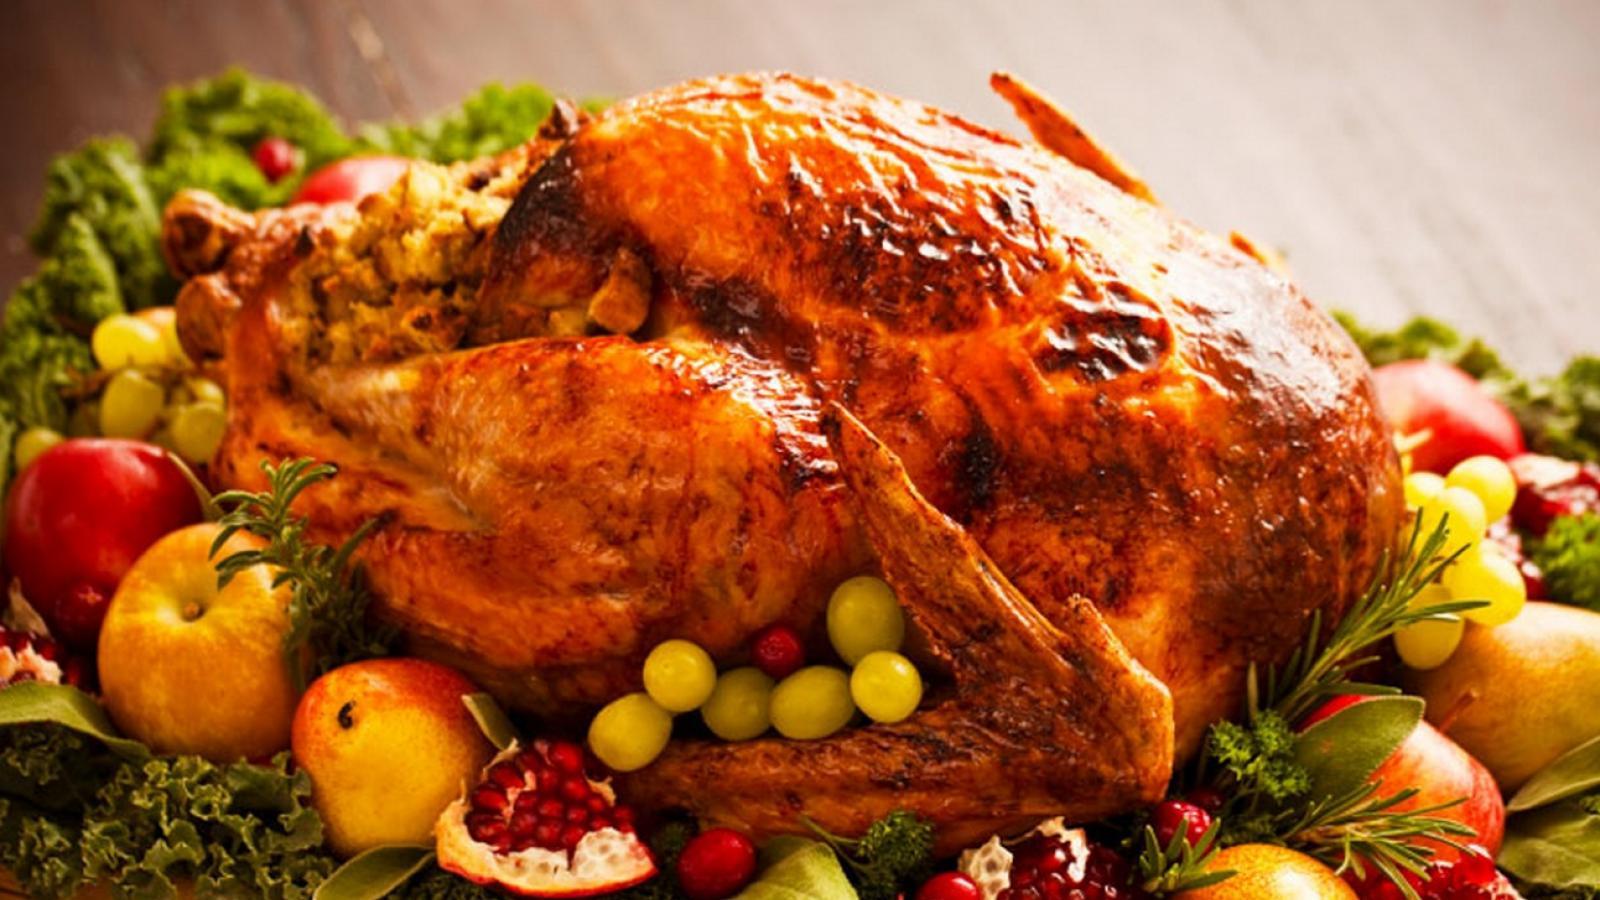 Five Places In Qatar For Your Christmas New Year's Turkey